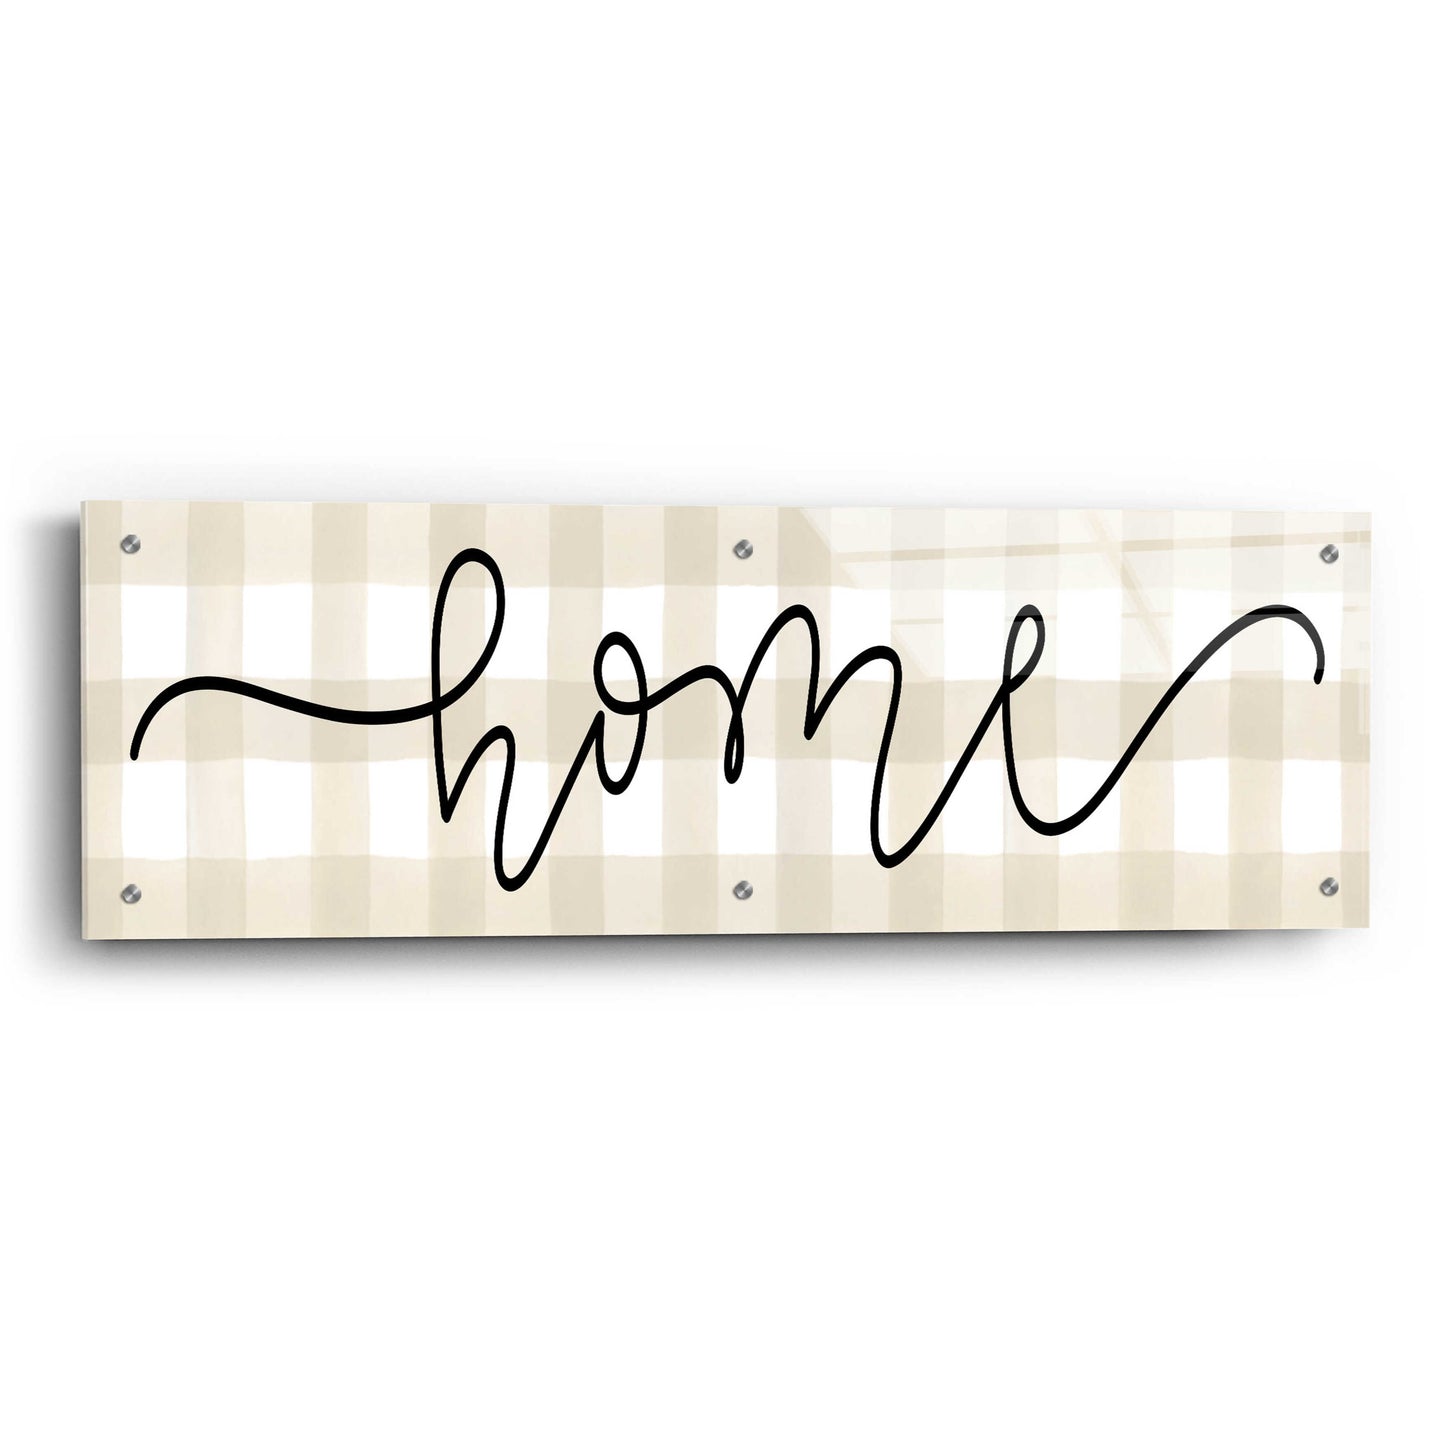 Epic Art 'Home' by Imperfect Dust, Acrylic Glass Wall Art,36x12